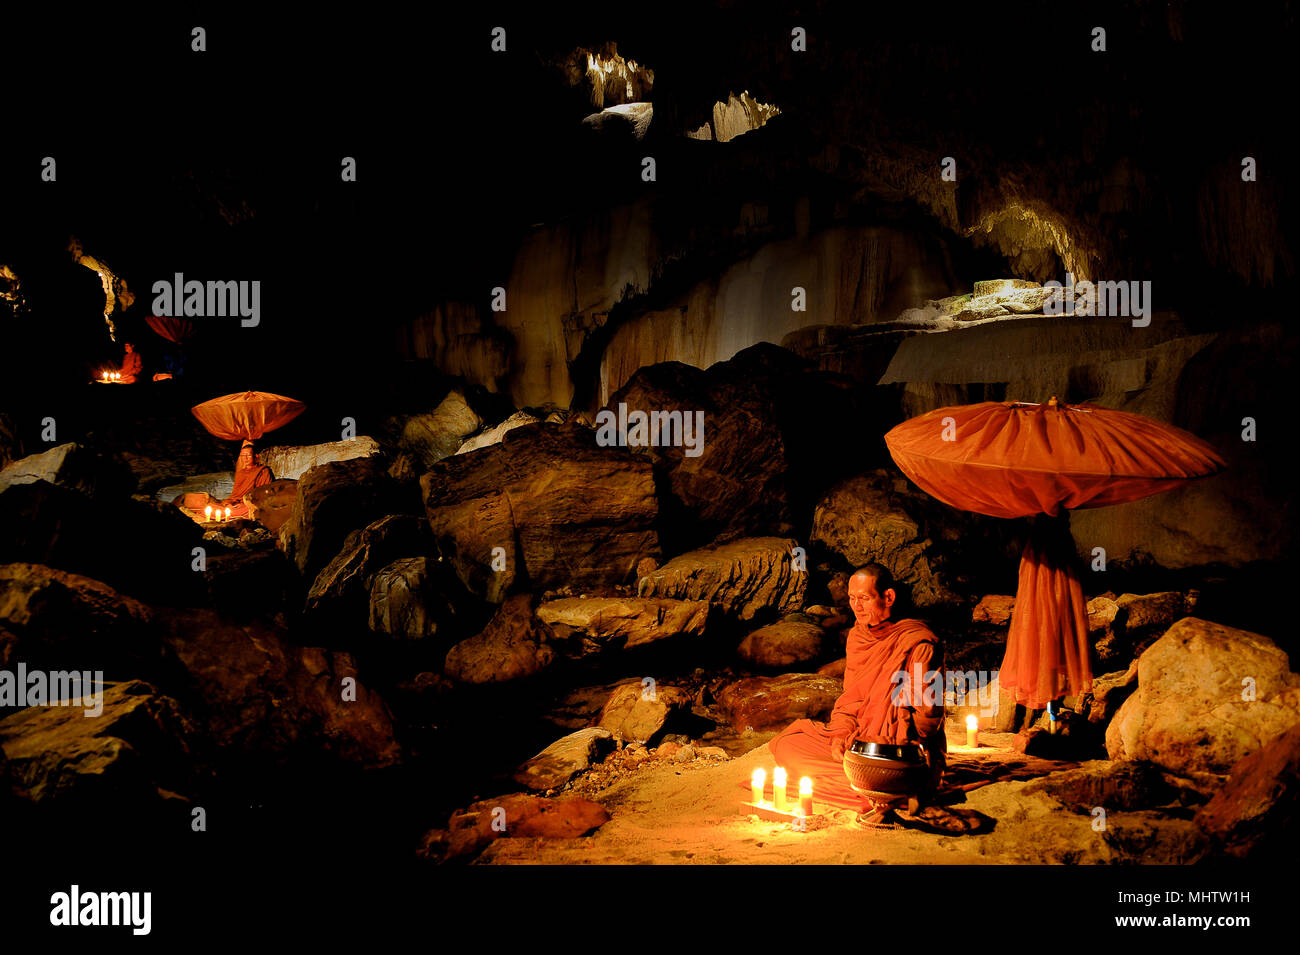 Kanchanaburi, Thailand - July 15, 2011: Buddhist monks sitting with alms bowl, lighten candle and long-handles umbrella to do individual meditation in Stock Photo